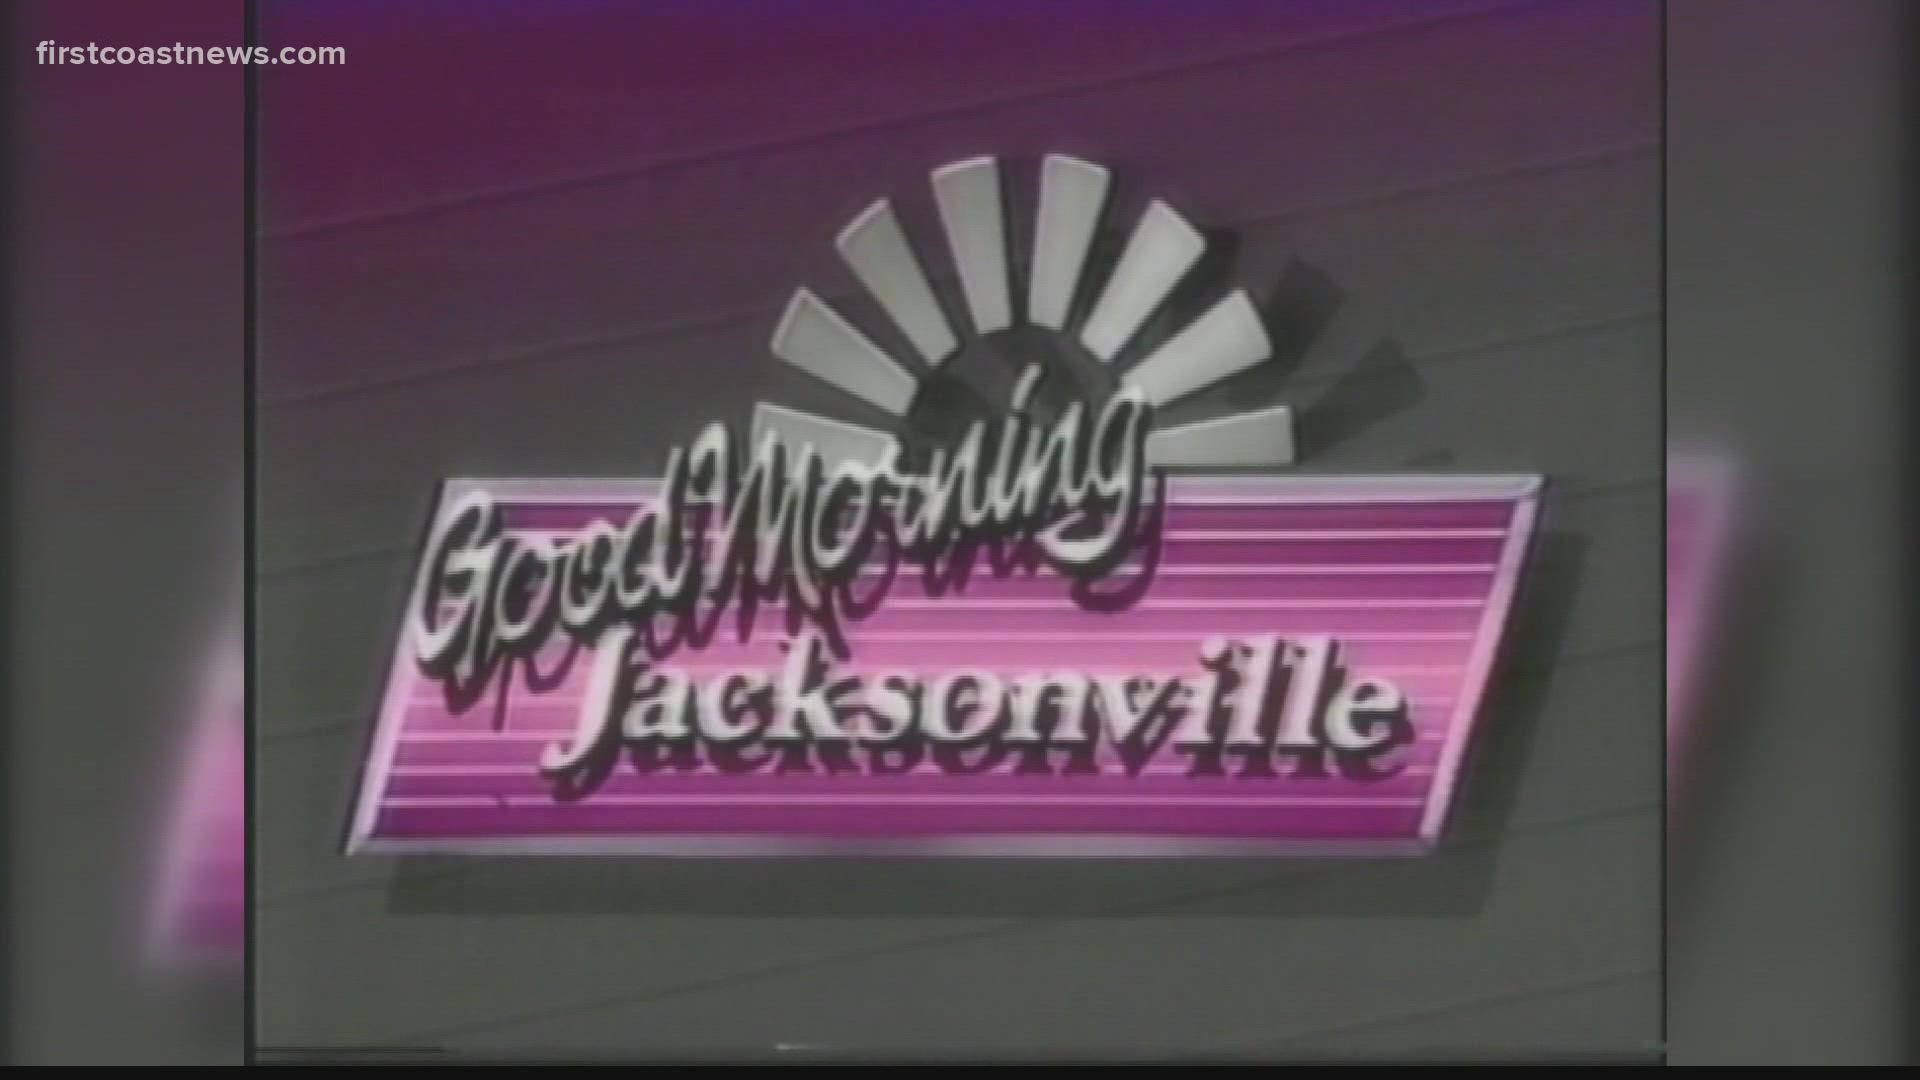 This was Jacksonville's first morning show.